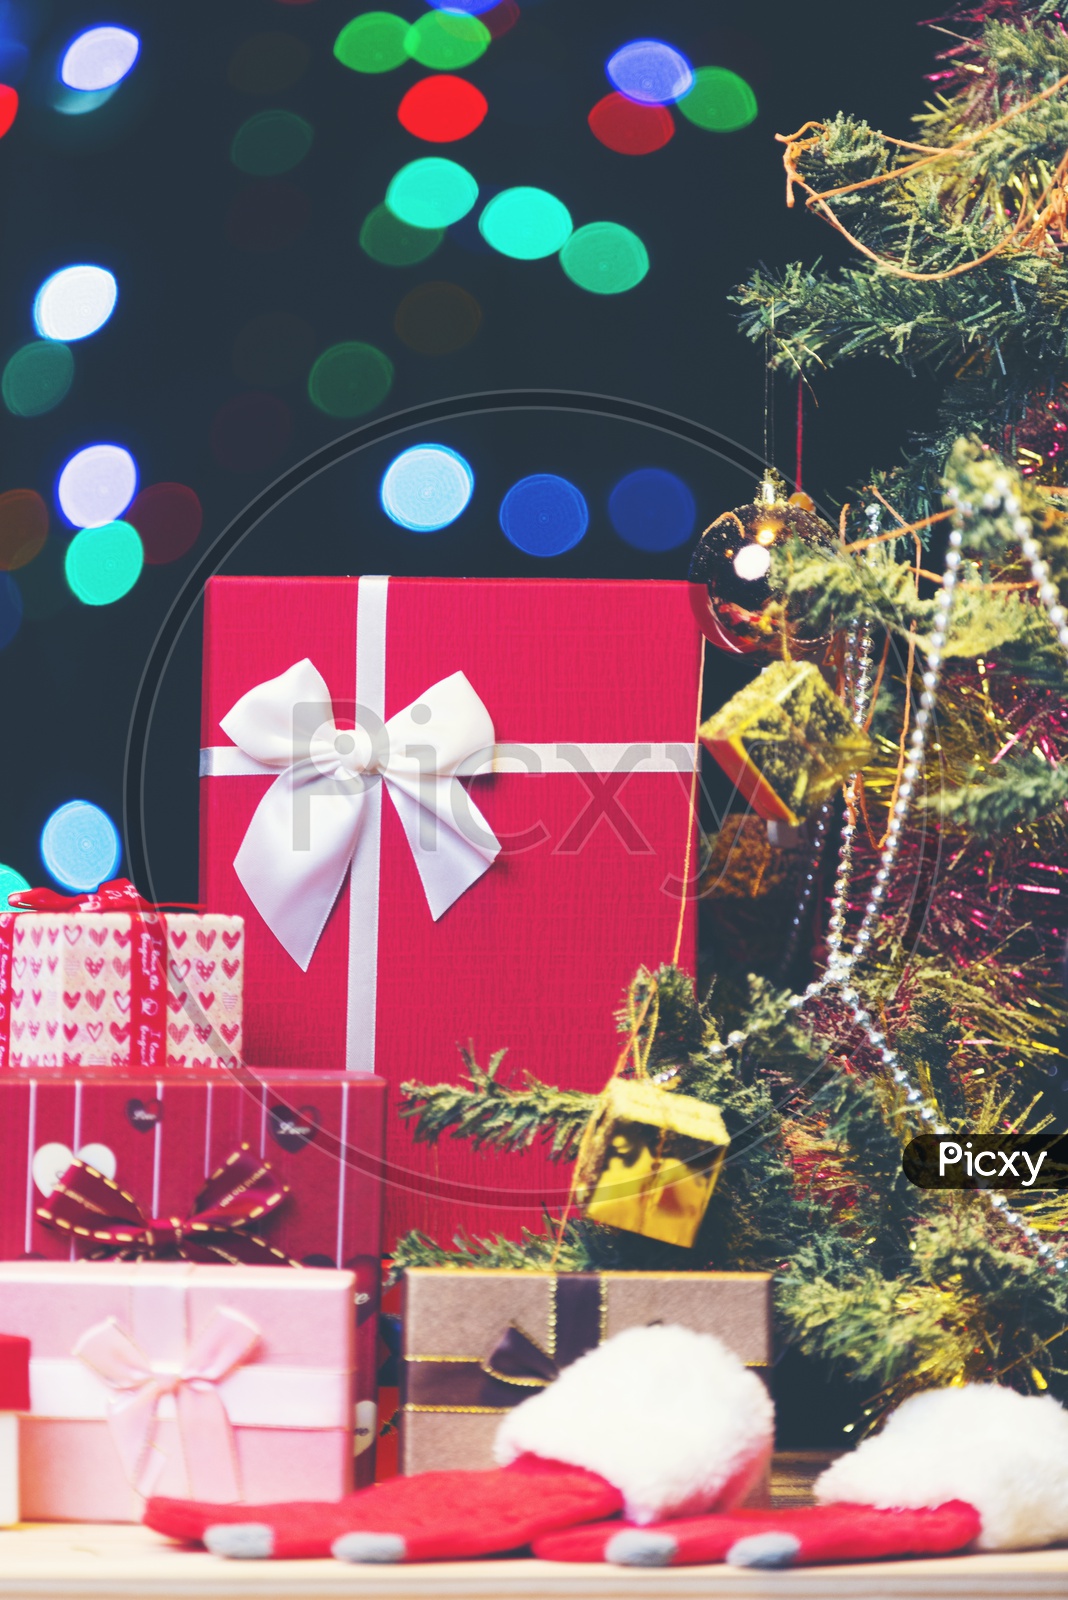 Decorated Christmas  Tree And Gift With Led Bokeh Background , templates For Christmas Festival